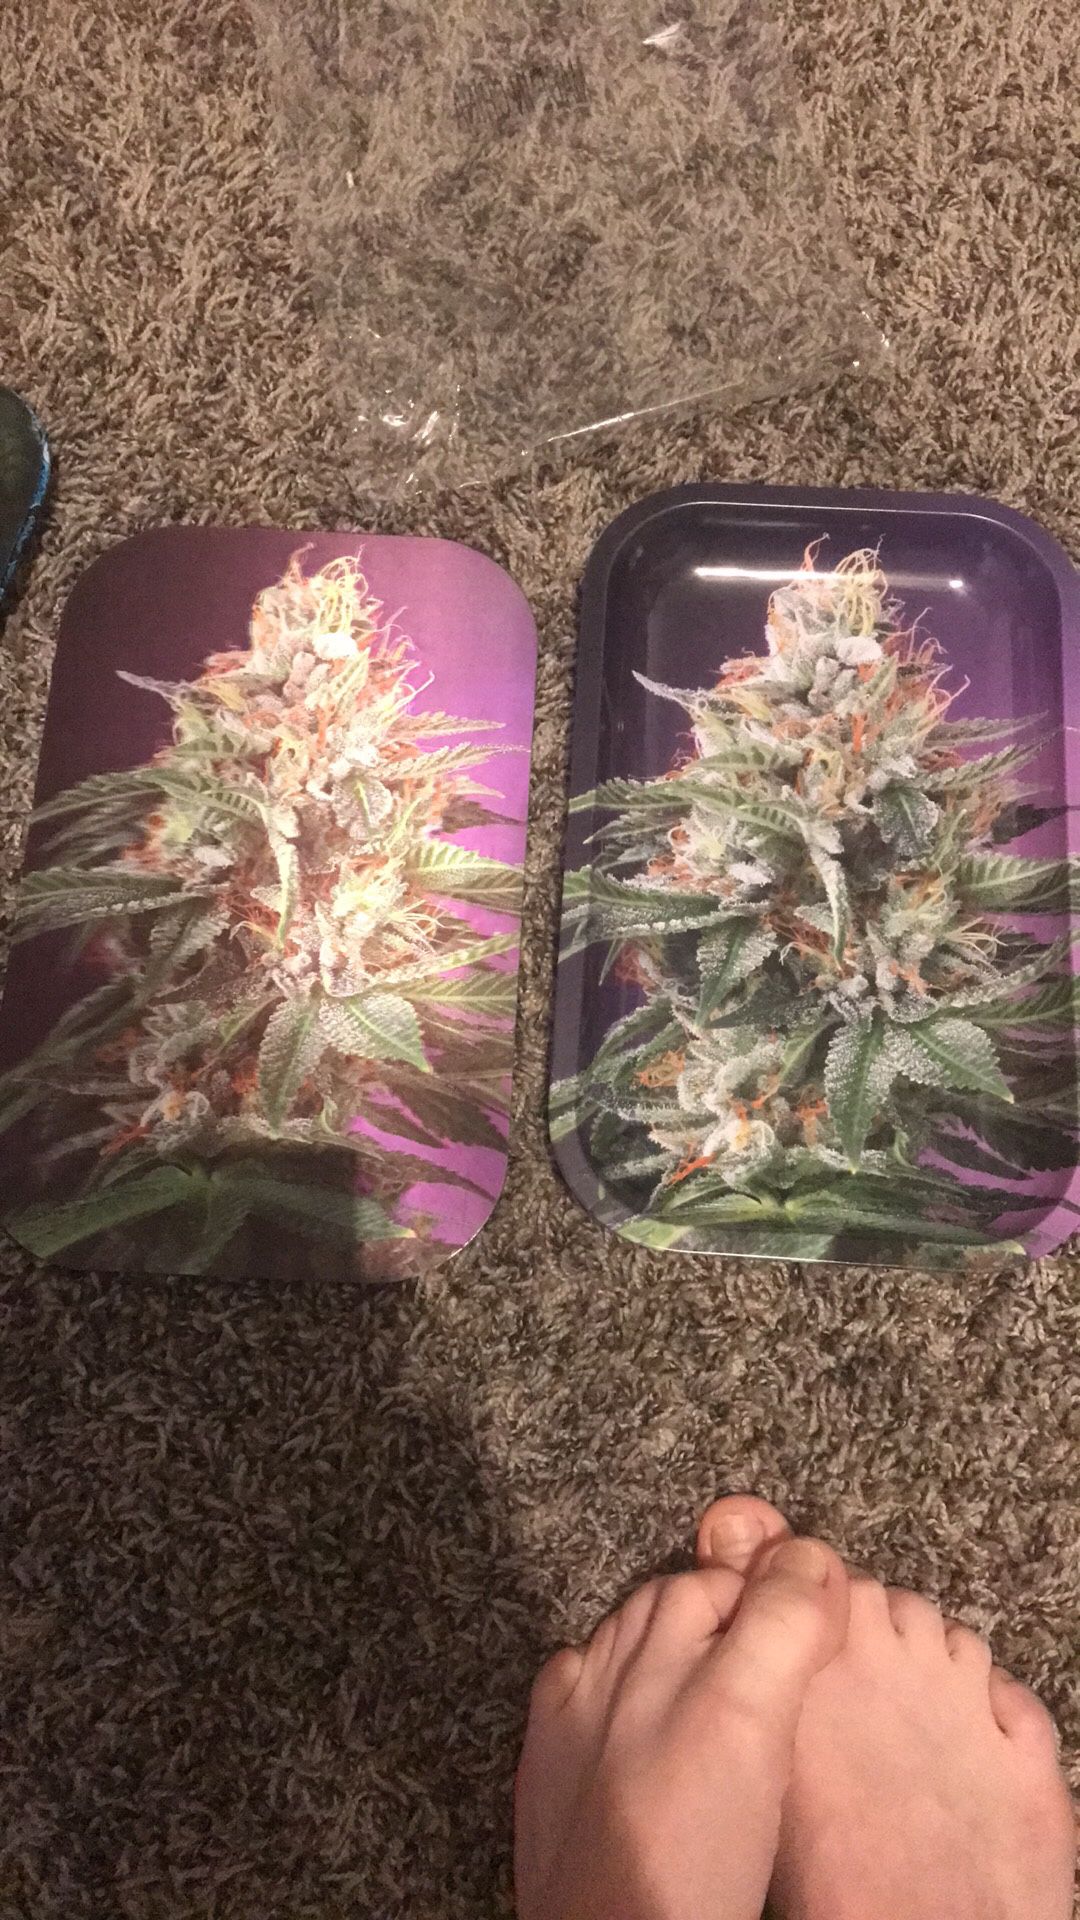 3D rolling tray